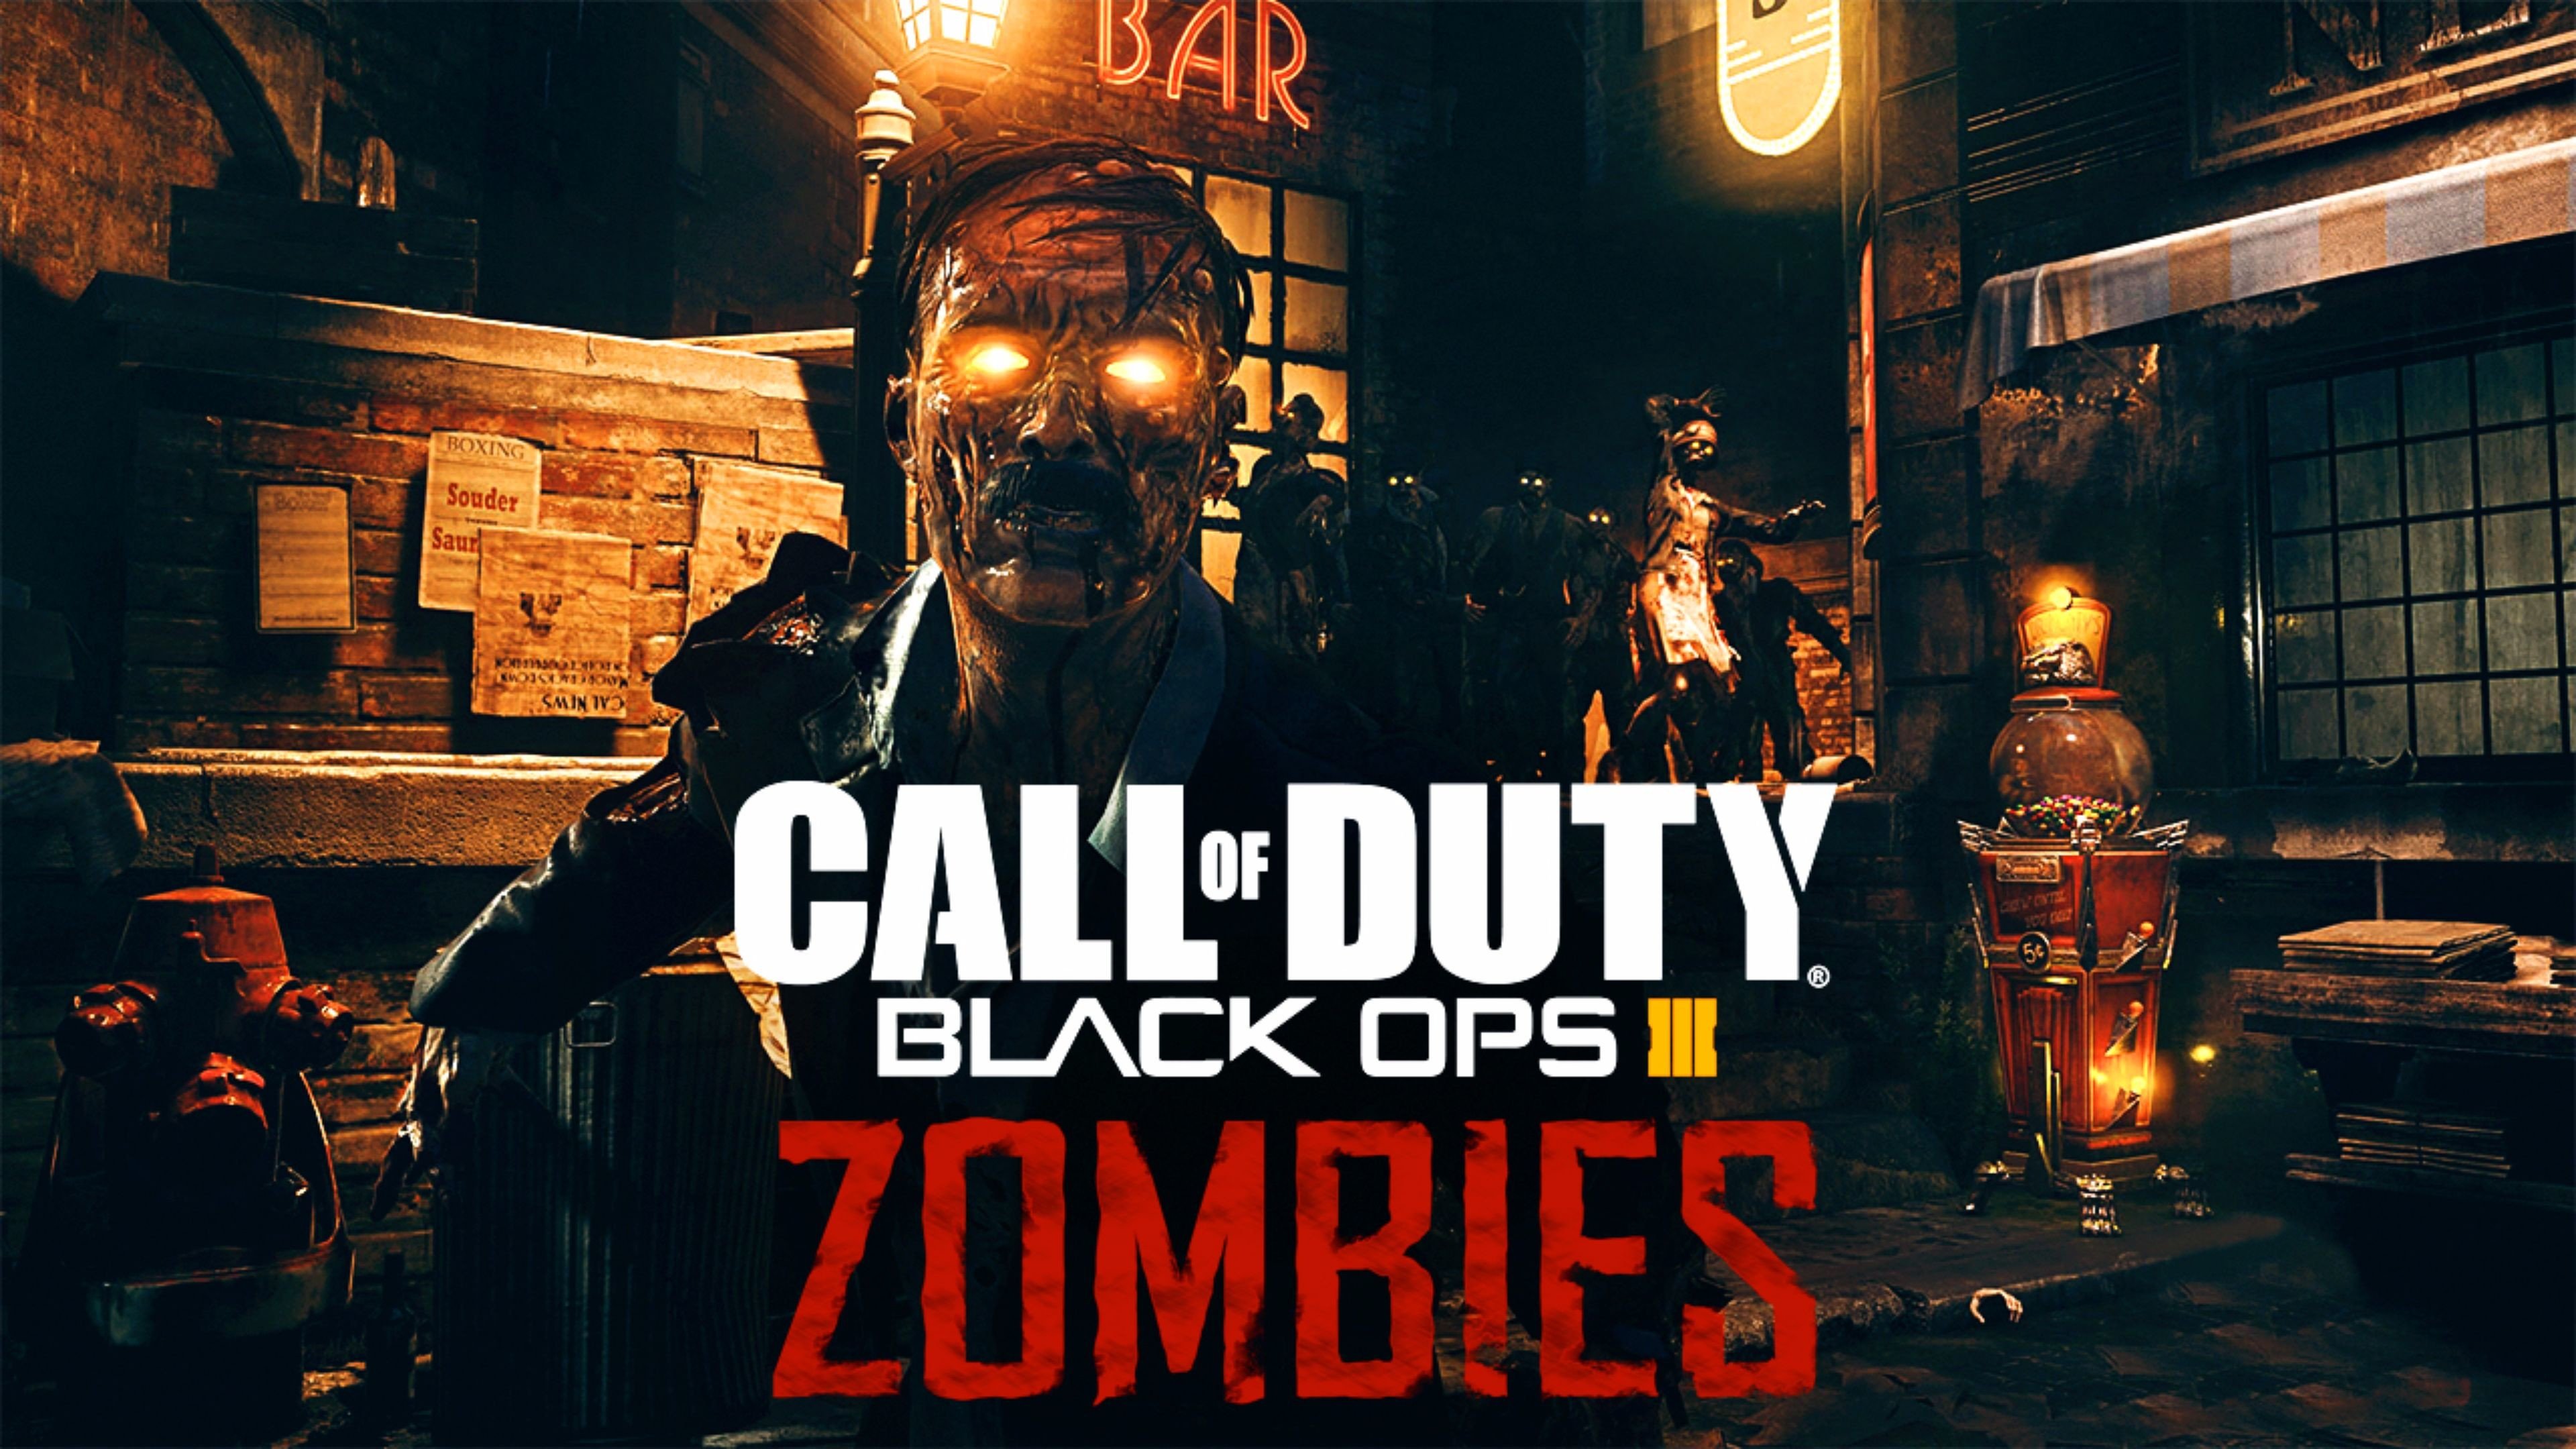 Cod Zombies Wallpapers images